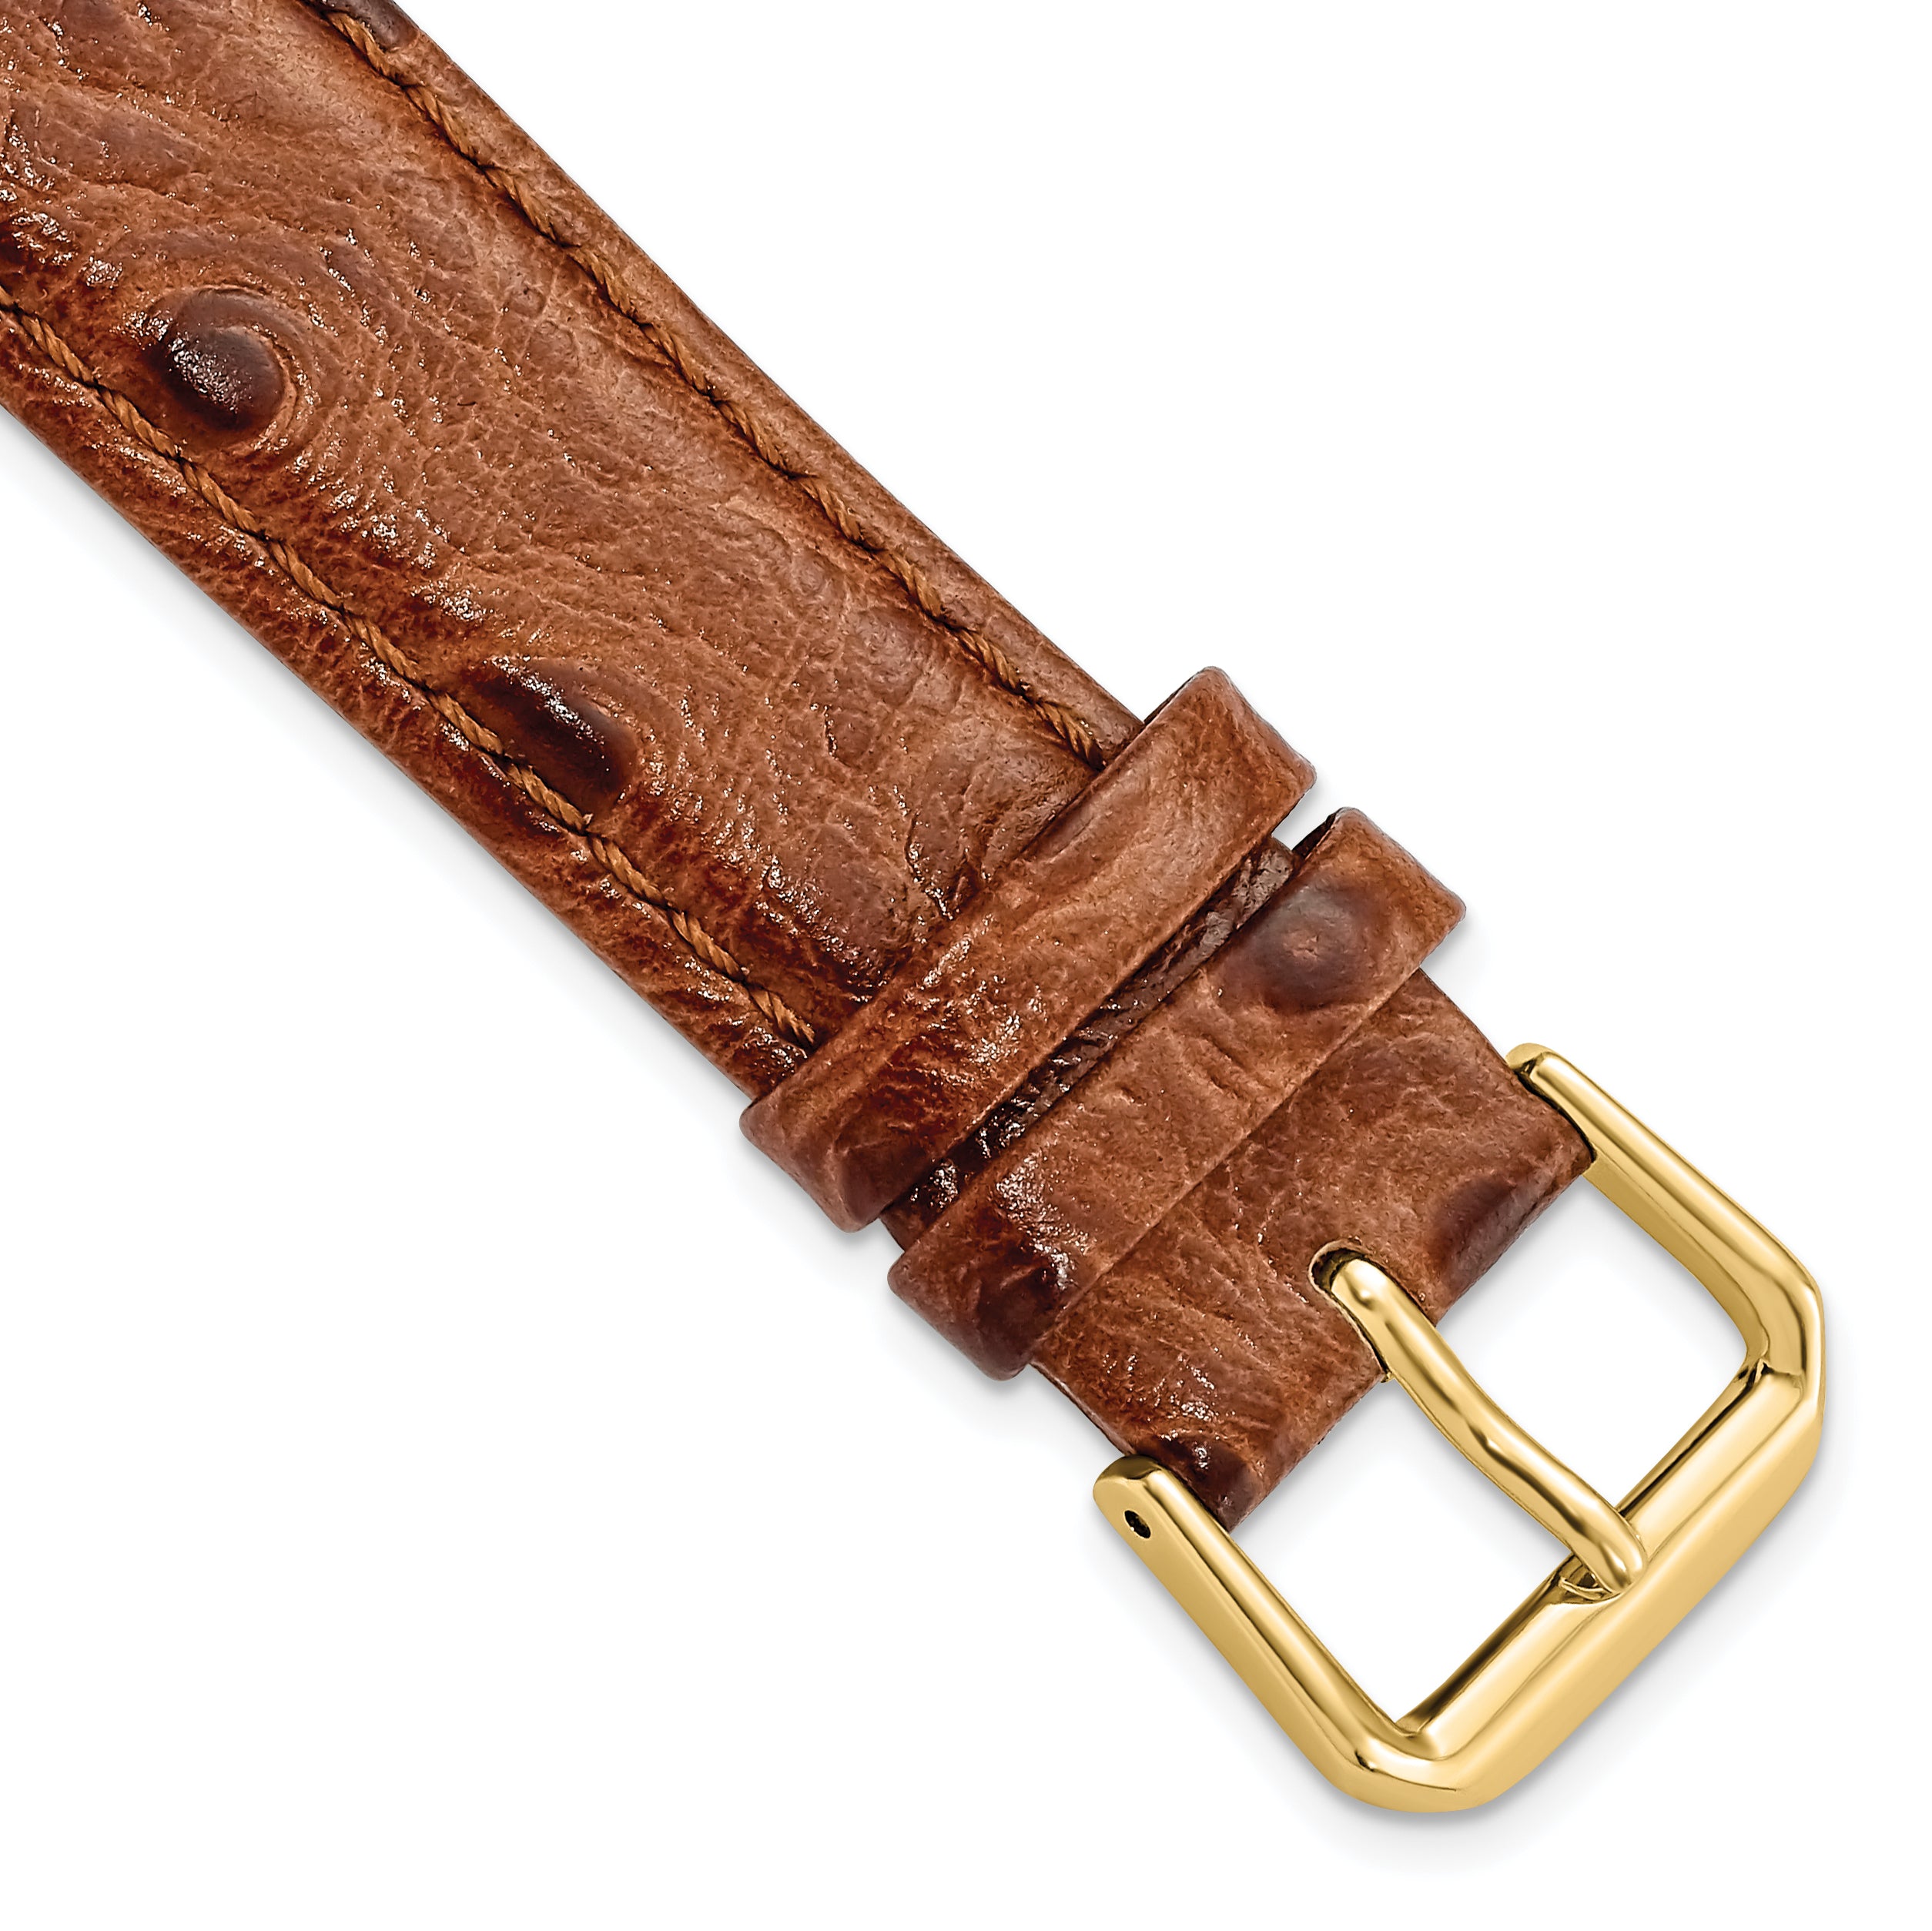 DeBeer 18mm Havana Ostrich Grain Leather with Gold-tone Buckle 7.5 inch Watch Band